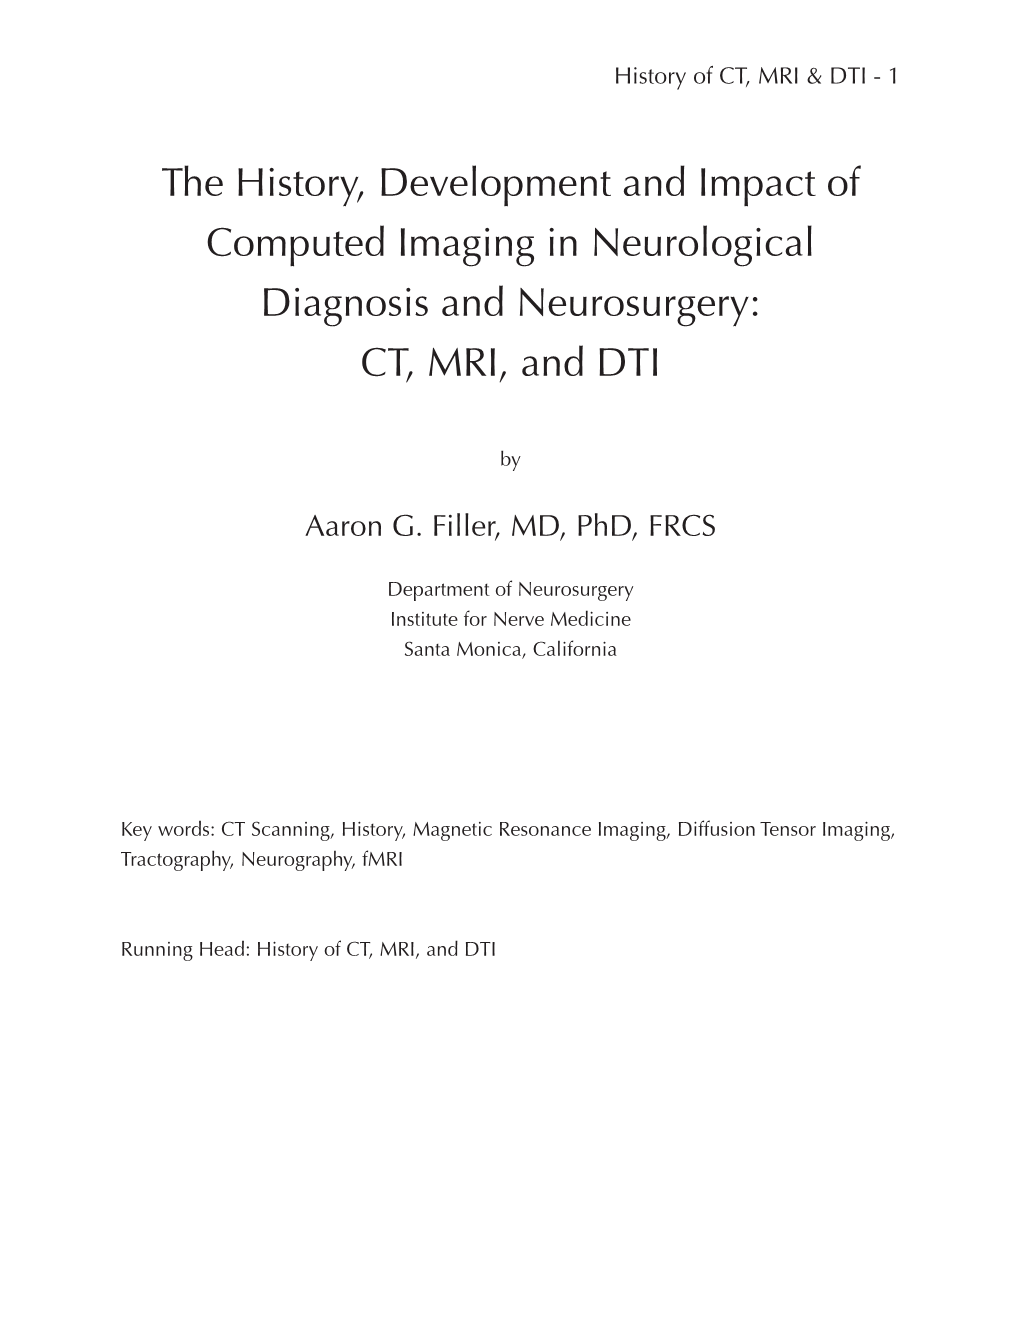 The History, Development and Impact of Computed Imaging in Neurological Diagnosis and Neurosurgery: CT, MRI, and DTI